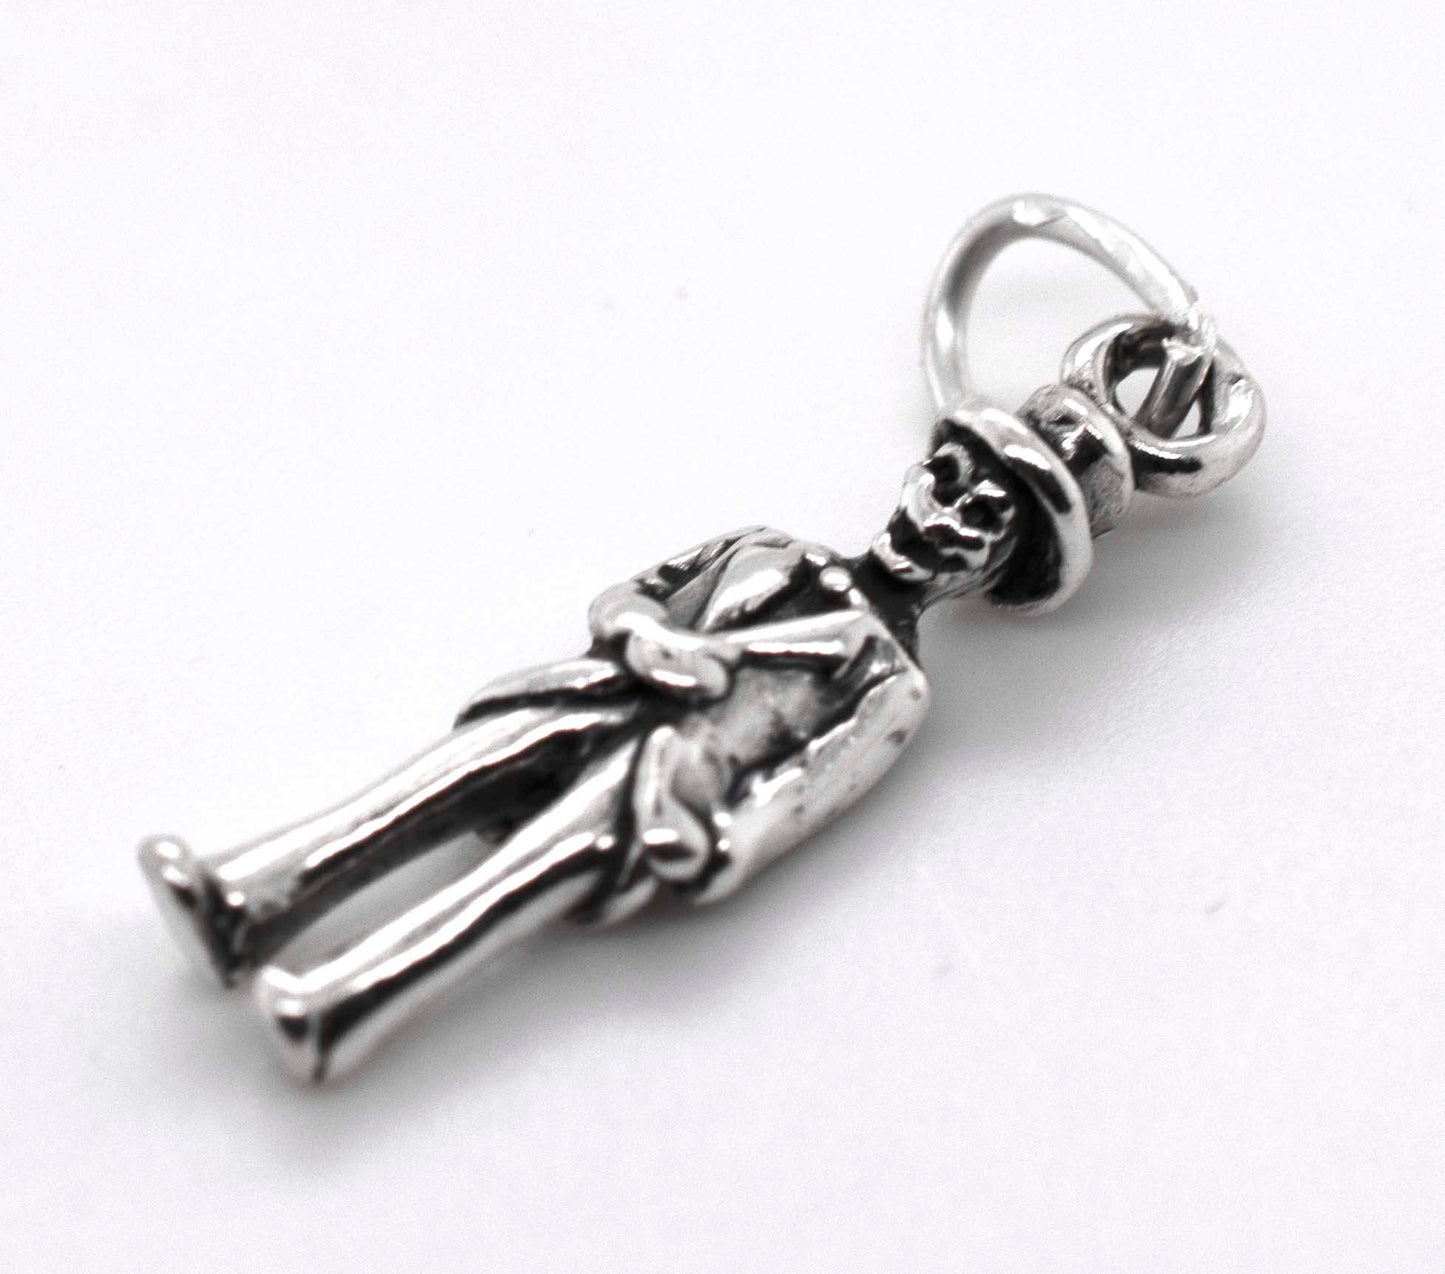 A Super Silver Skeleton Groom Charm, made of .925 Sterling Silver, perfect for the Halloween season.